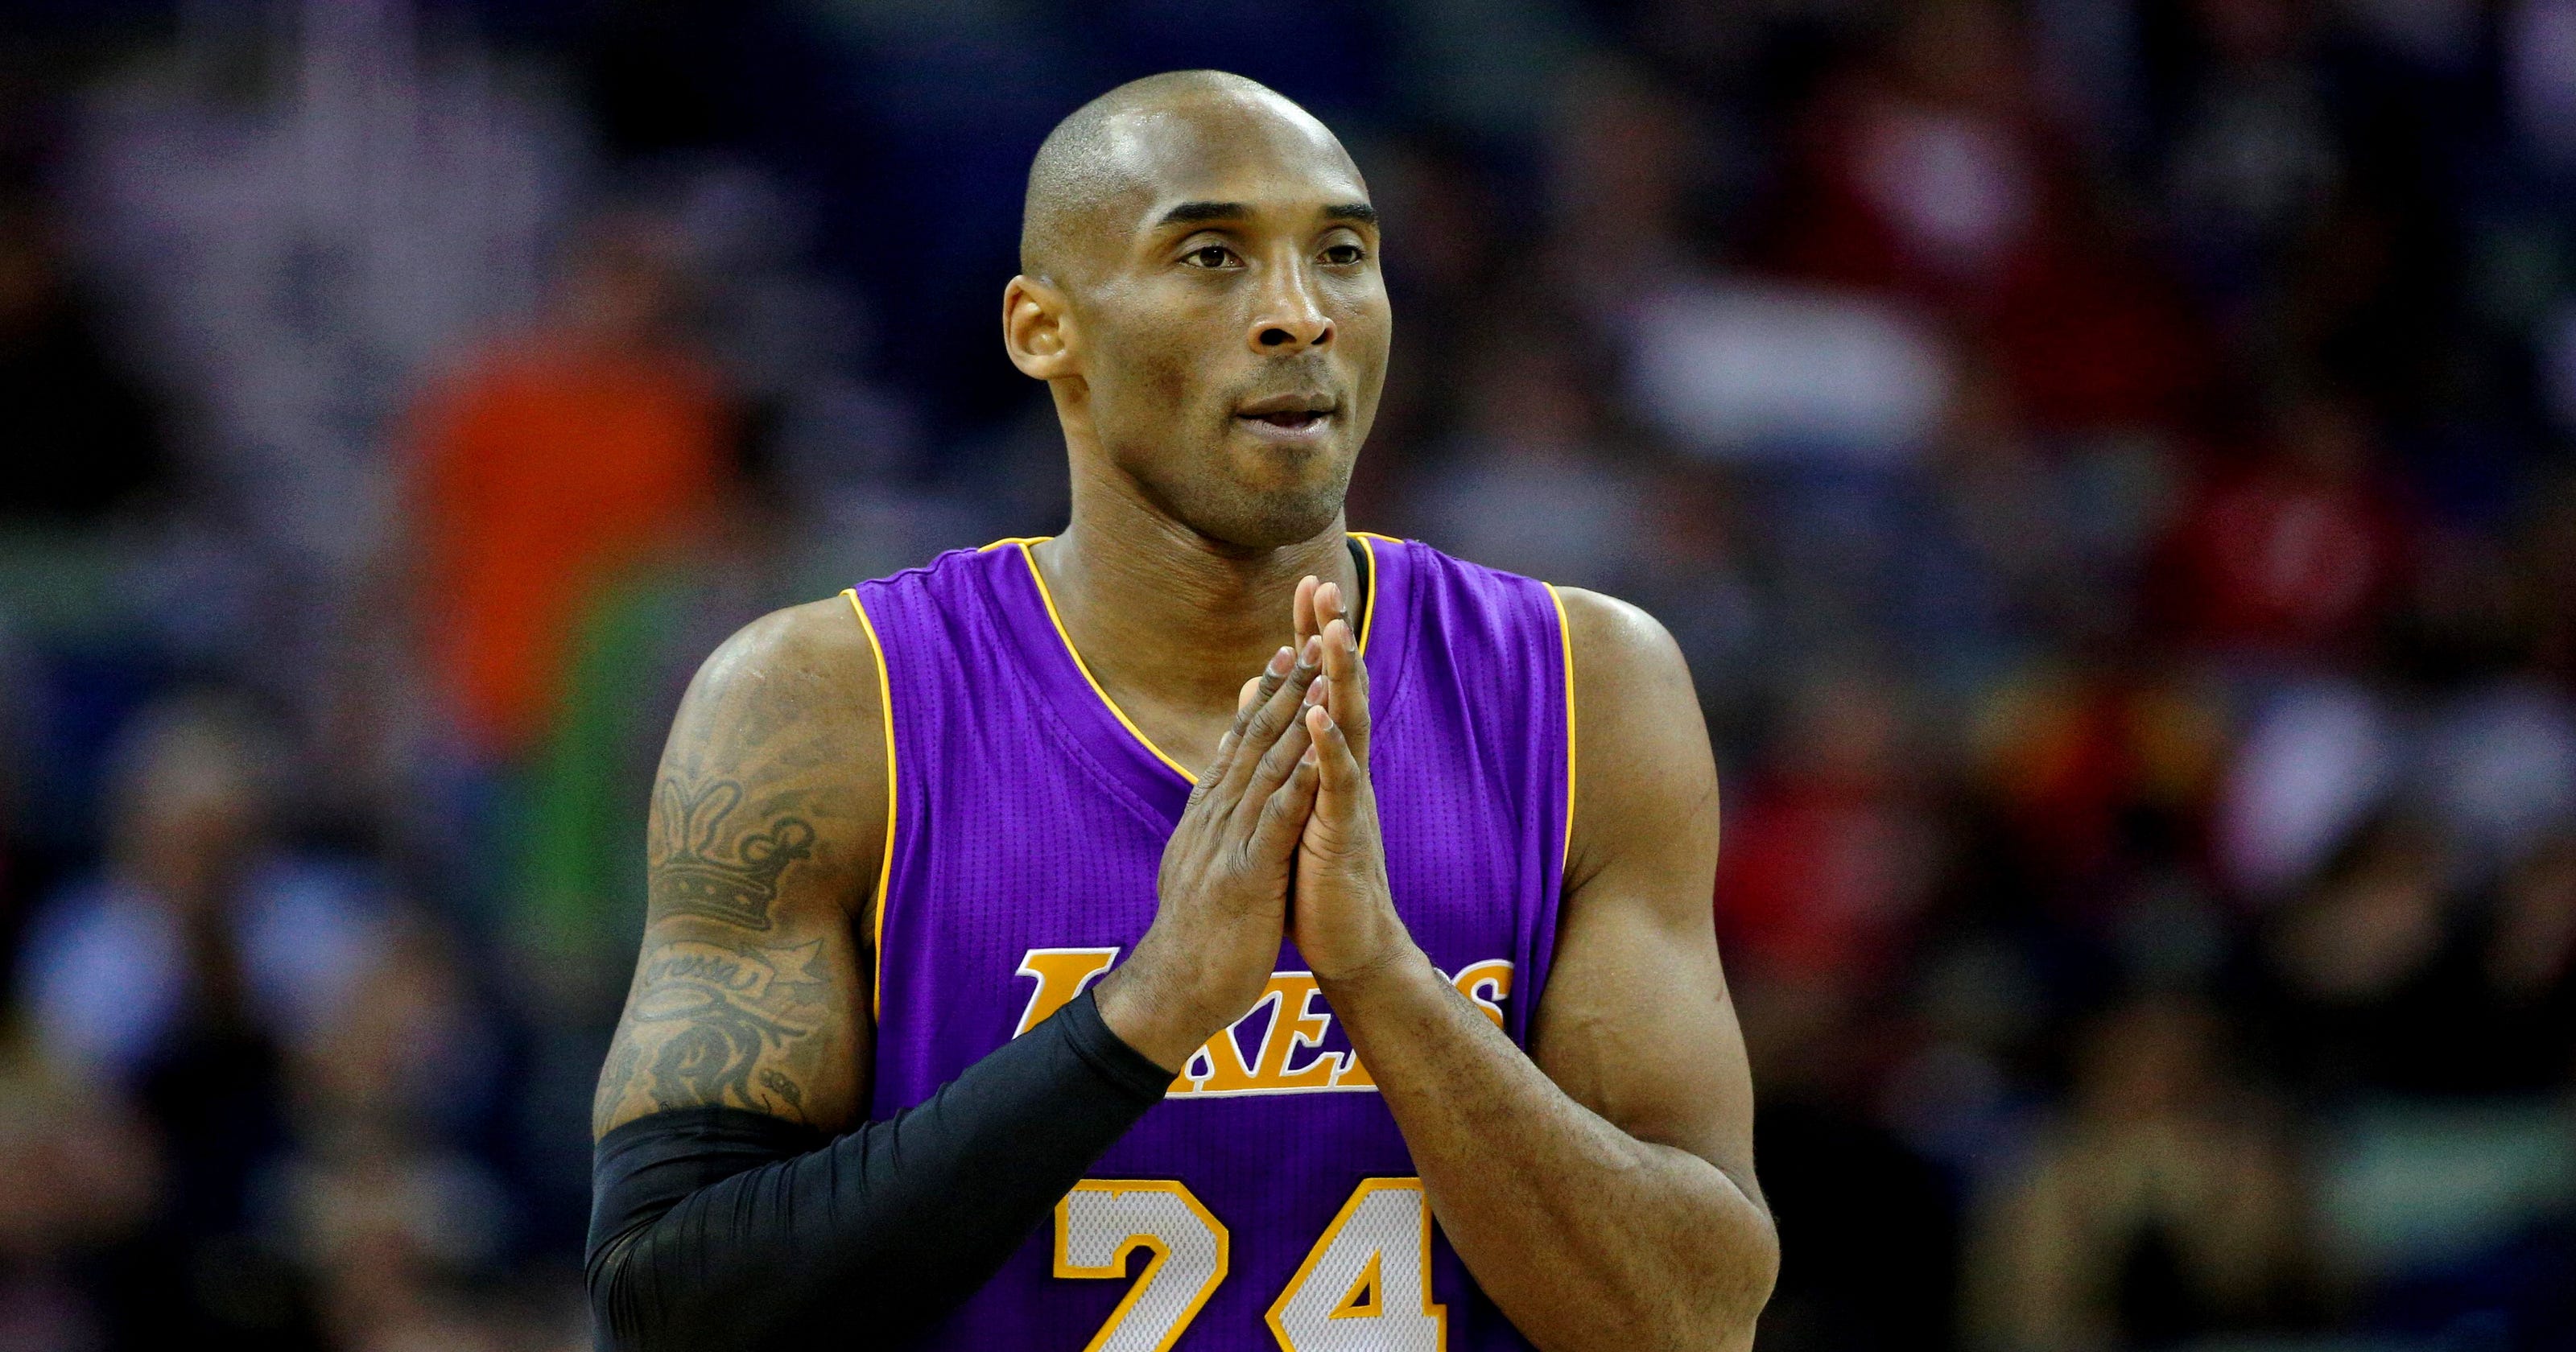 Kobe Bryant's storied career year-by-year3200 x 1680